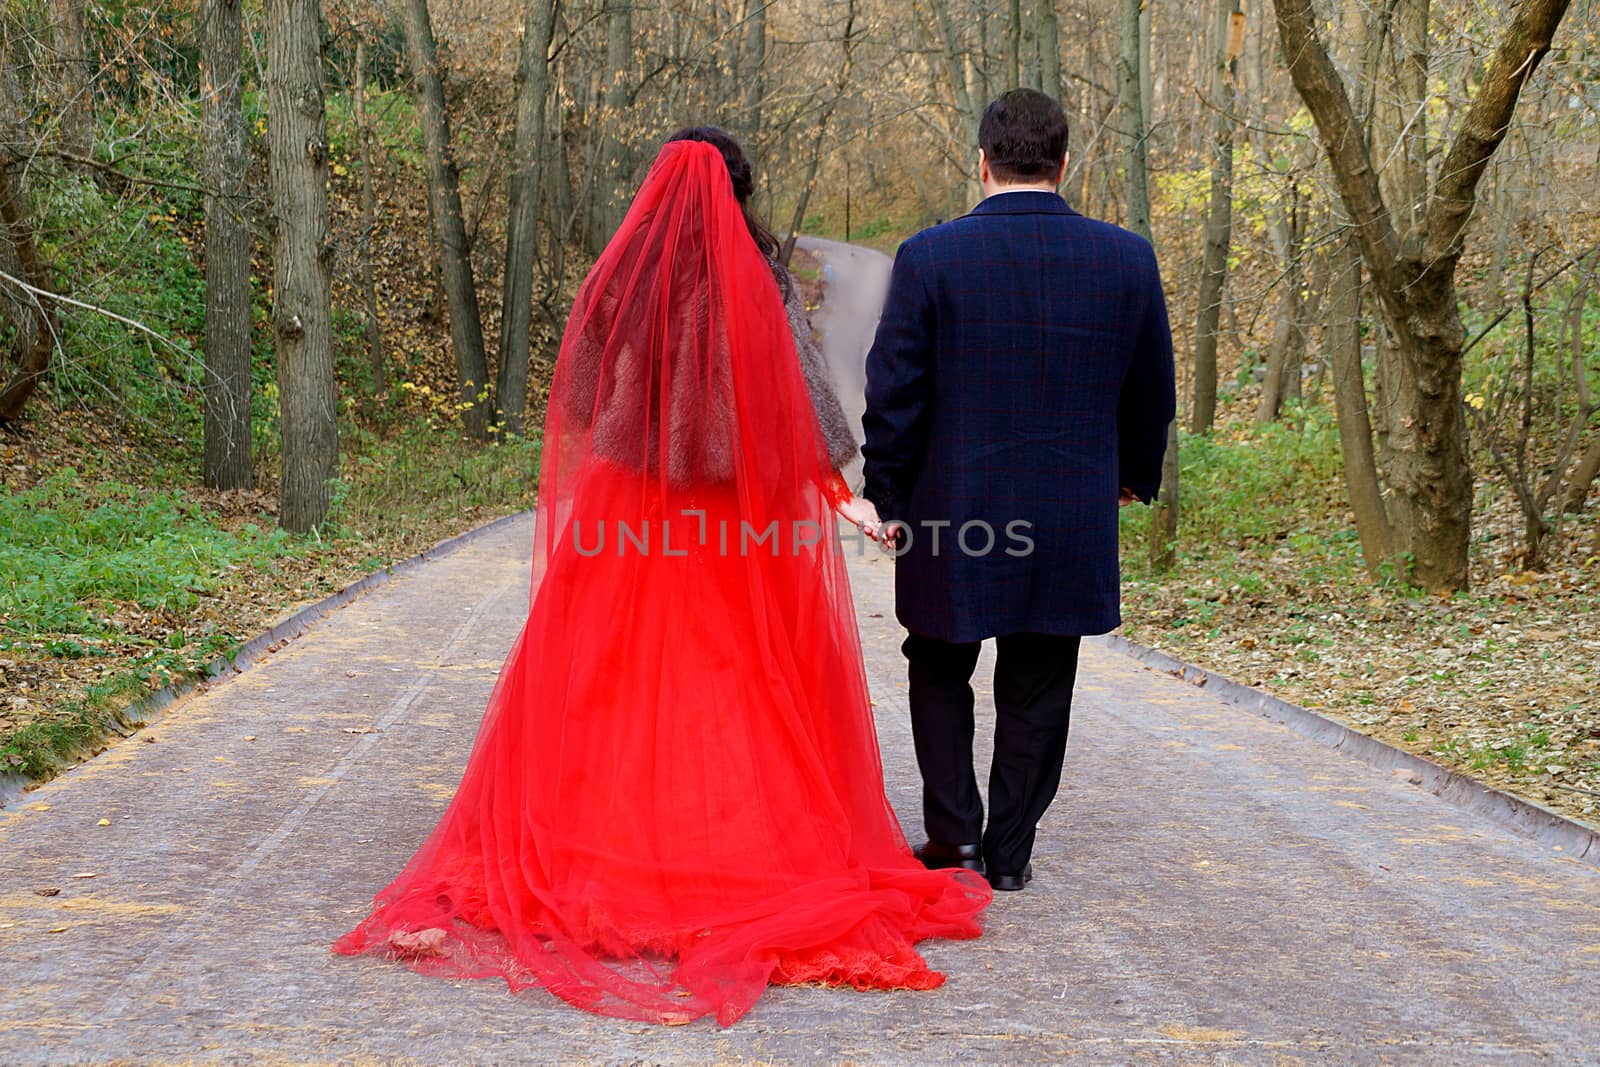 The bride in a red dress and the groom walk along the road in the park, rear view